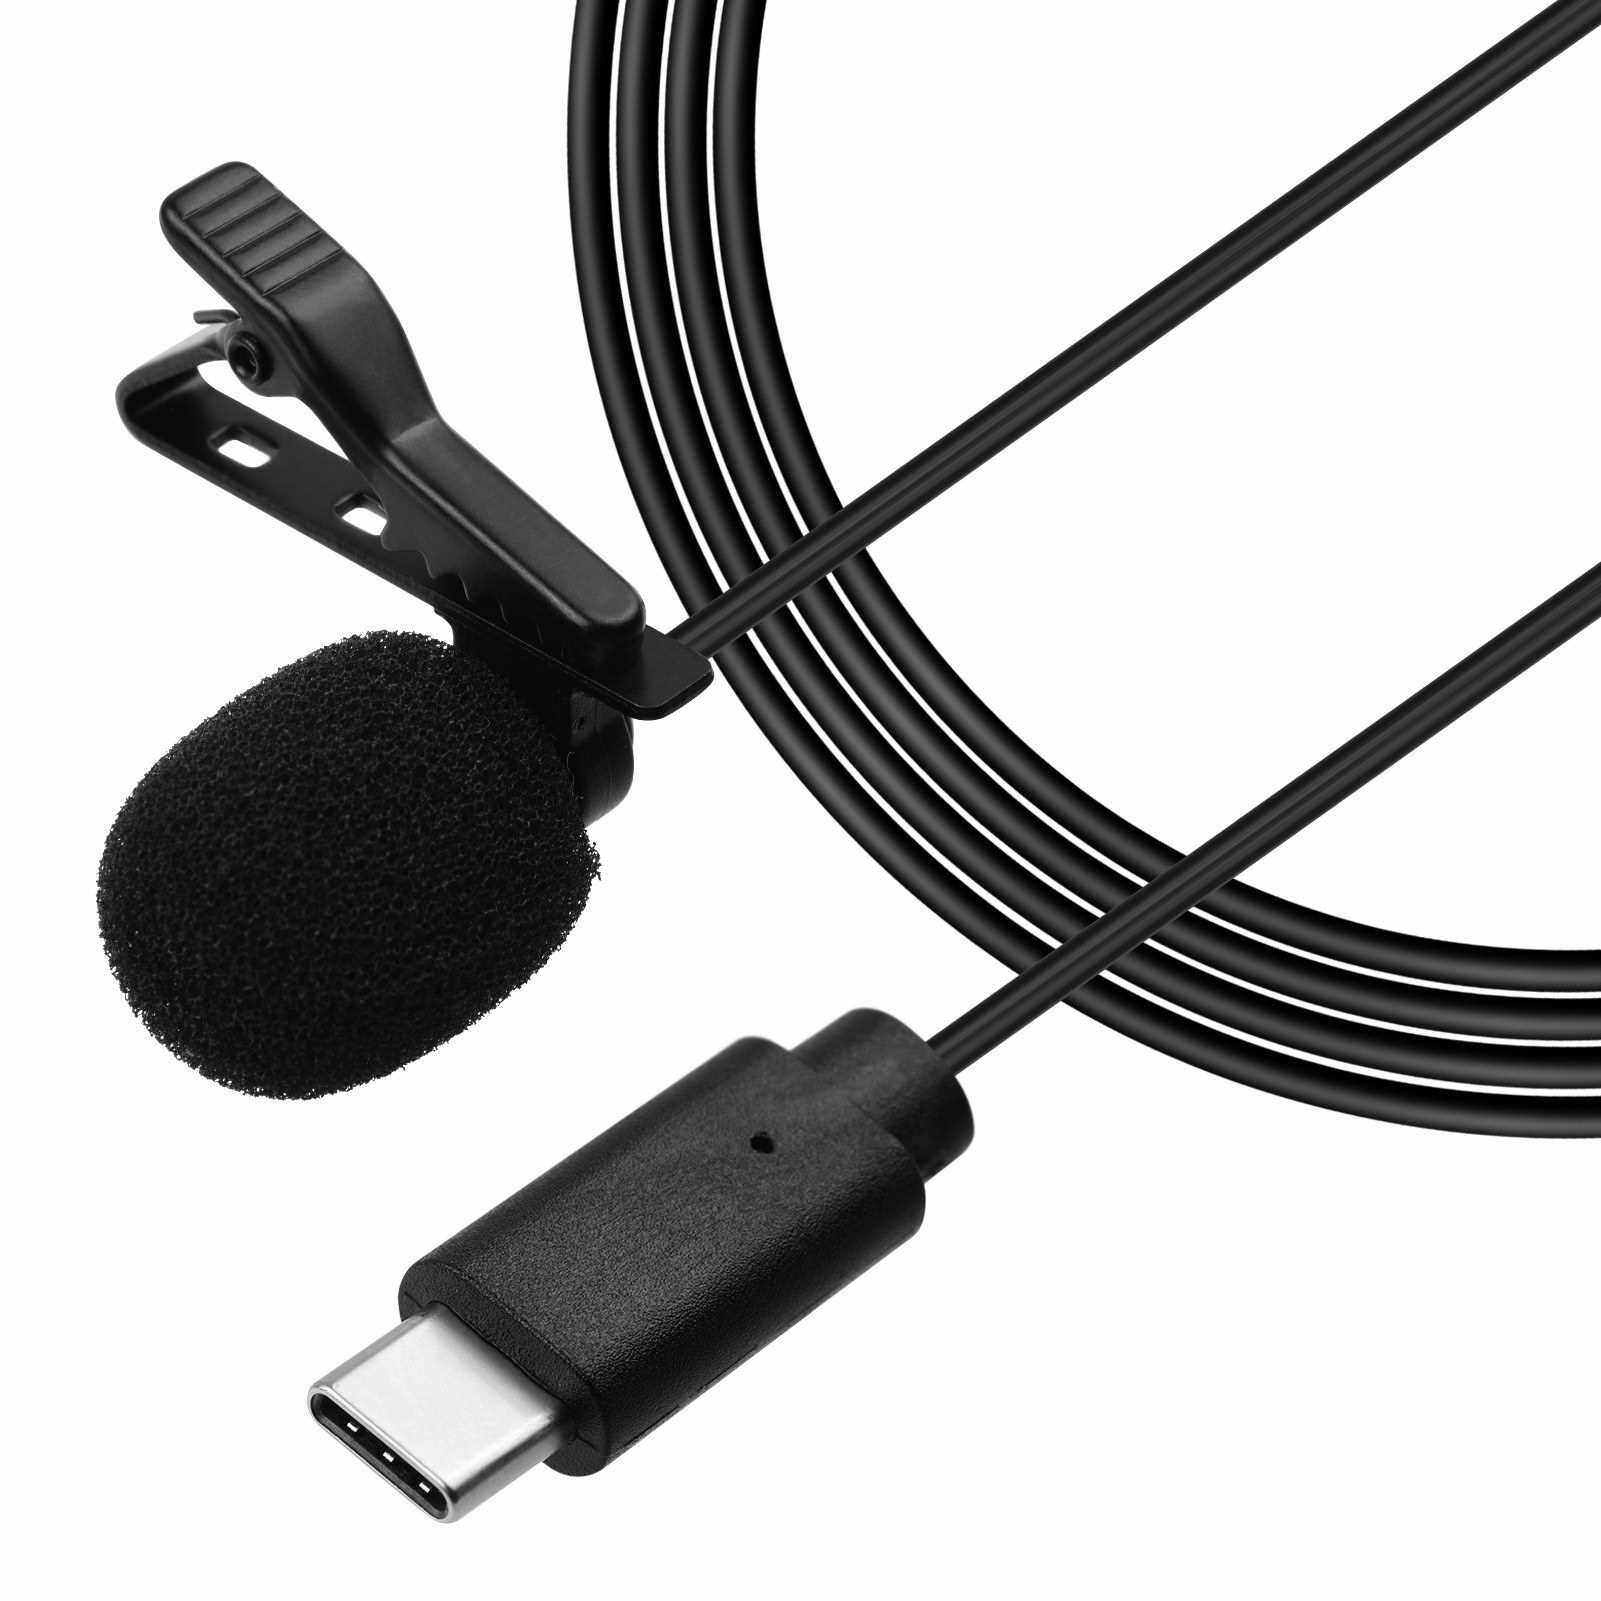 Lavalier Lapel Microphone Clip-on Omnidirectional Mic Single Head 1.5m/4.9ft Cable with Foam Windsceen Carrying Pouch for USB Type-C Interface Devices for Interview Conference Recording (Standard)